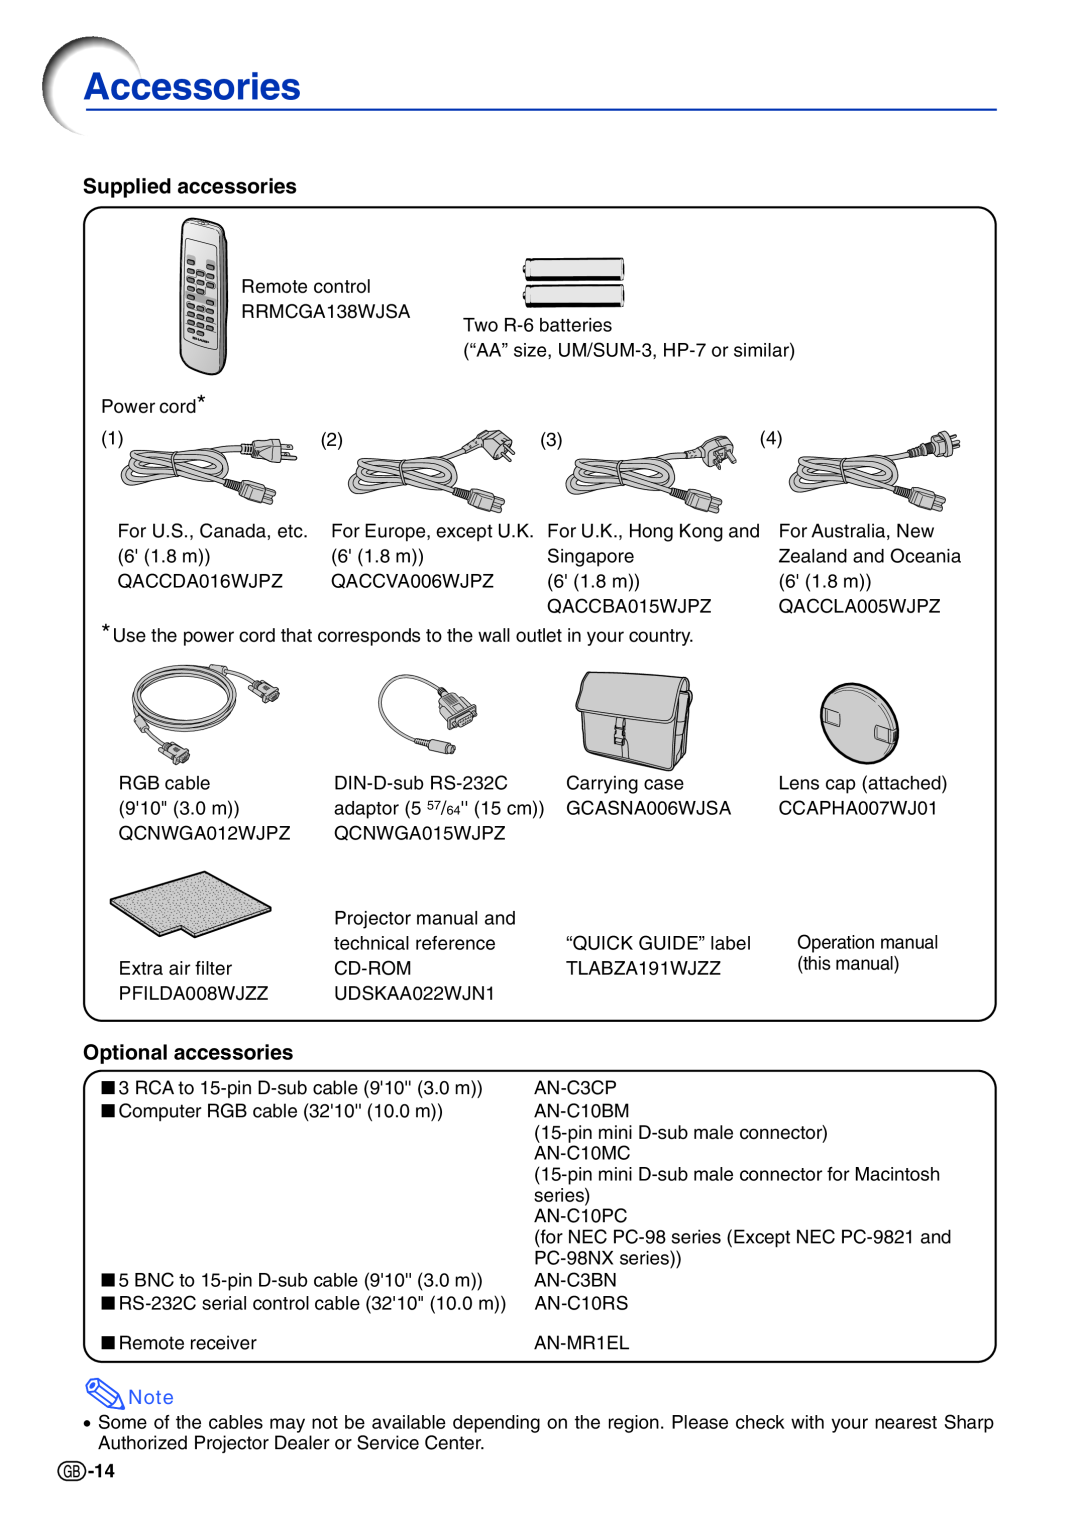 Sharp PG-A10X operation manual Accessories, Supplied accessories, Optional accessories 